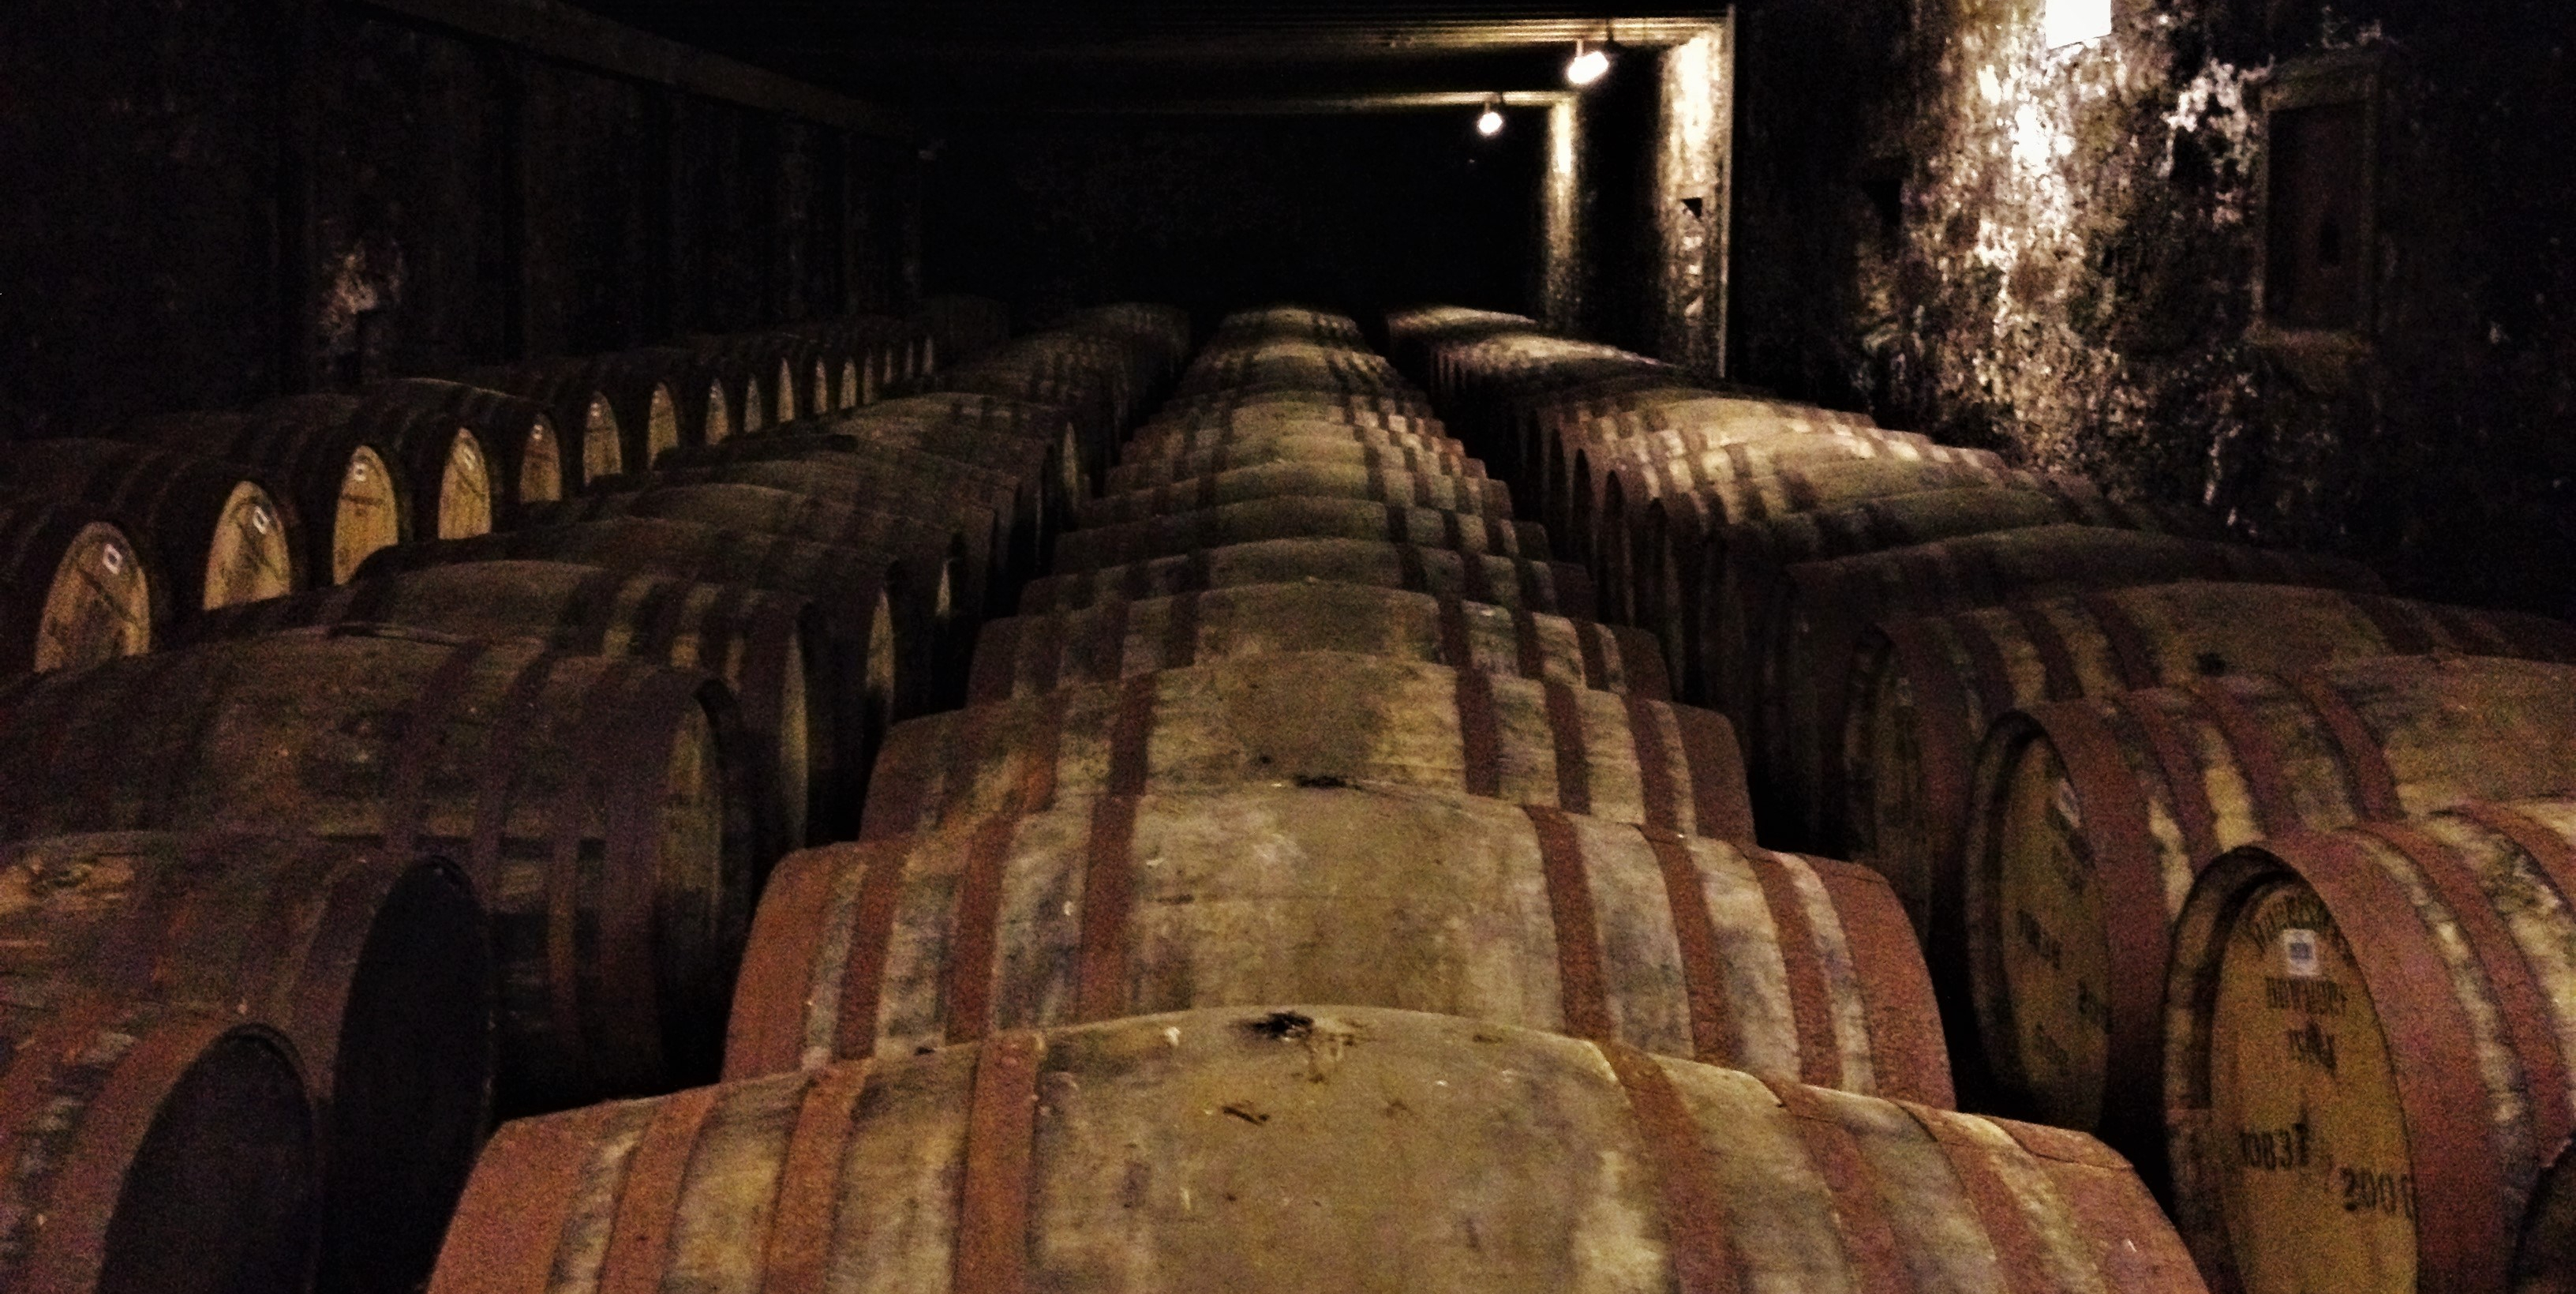 Whisky slowly maturing in Bowmore's famous Vault 1 warehouse